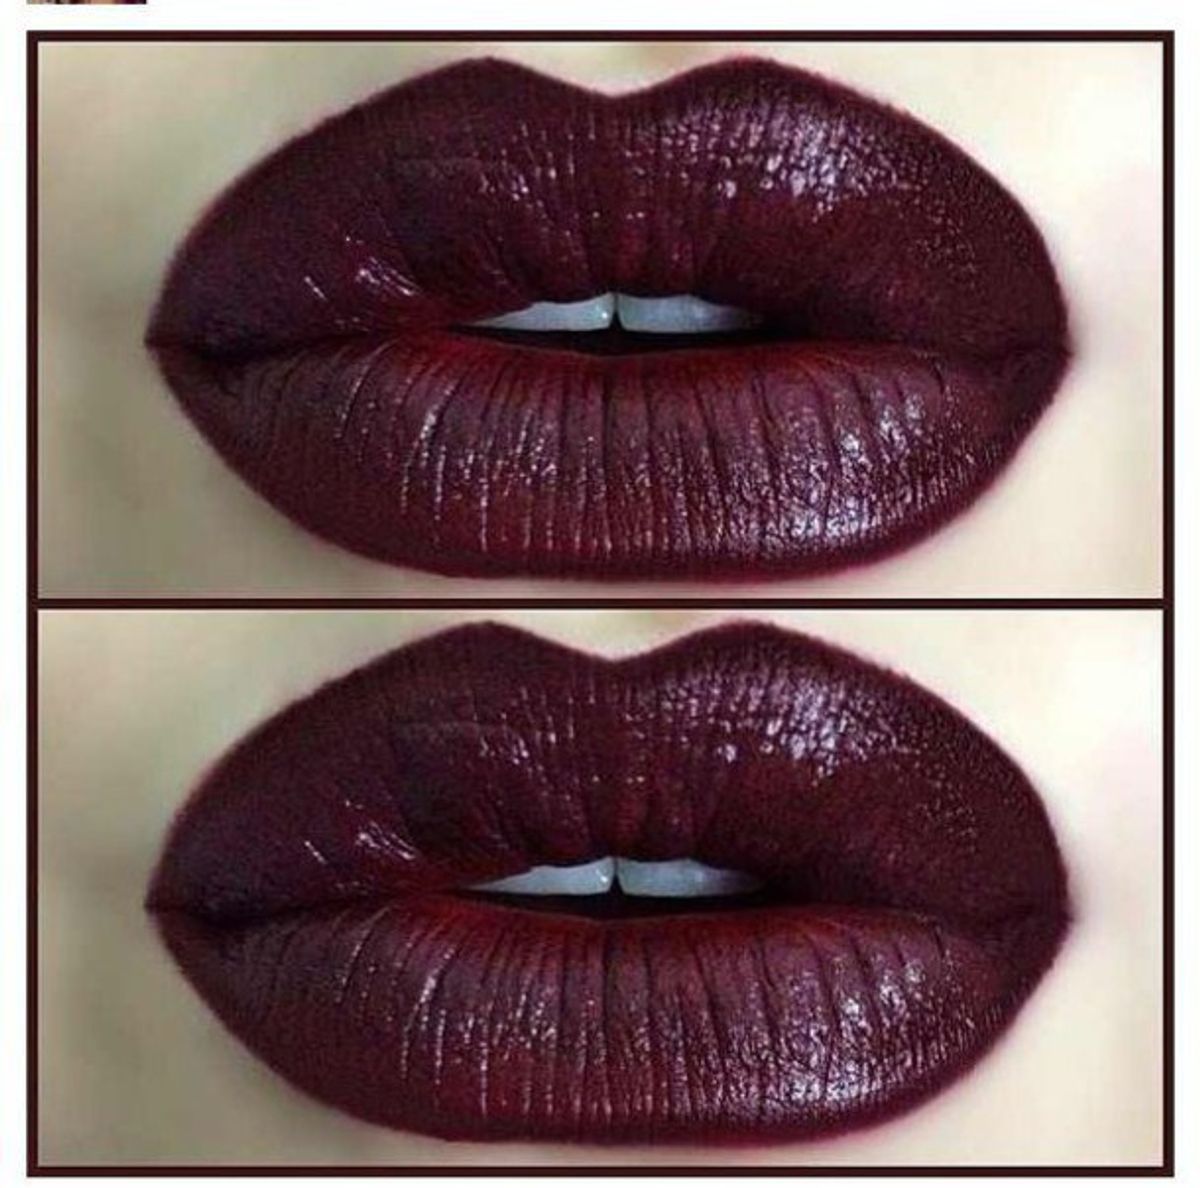 How to Where a Dark Lip, or Any Lip